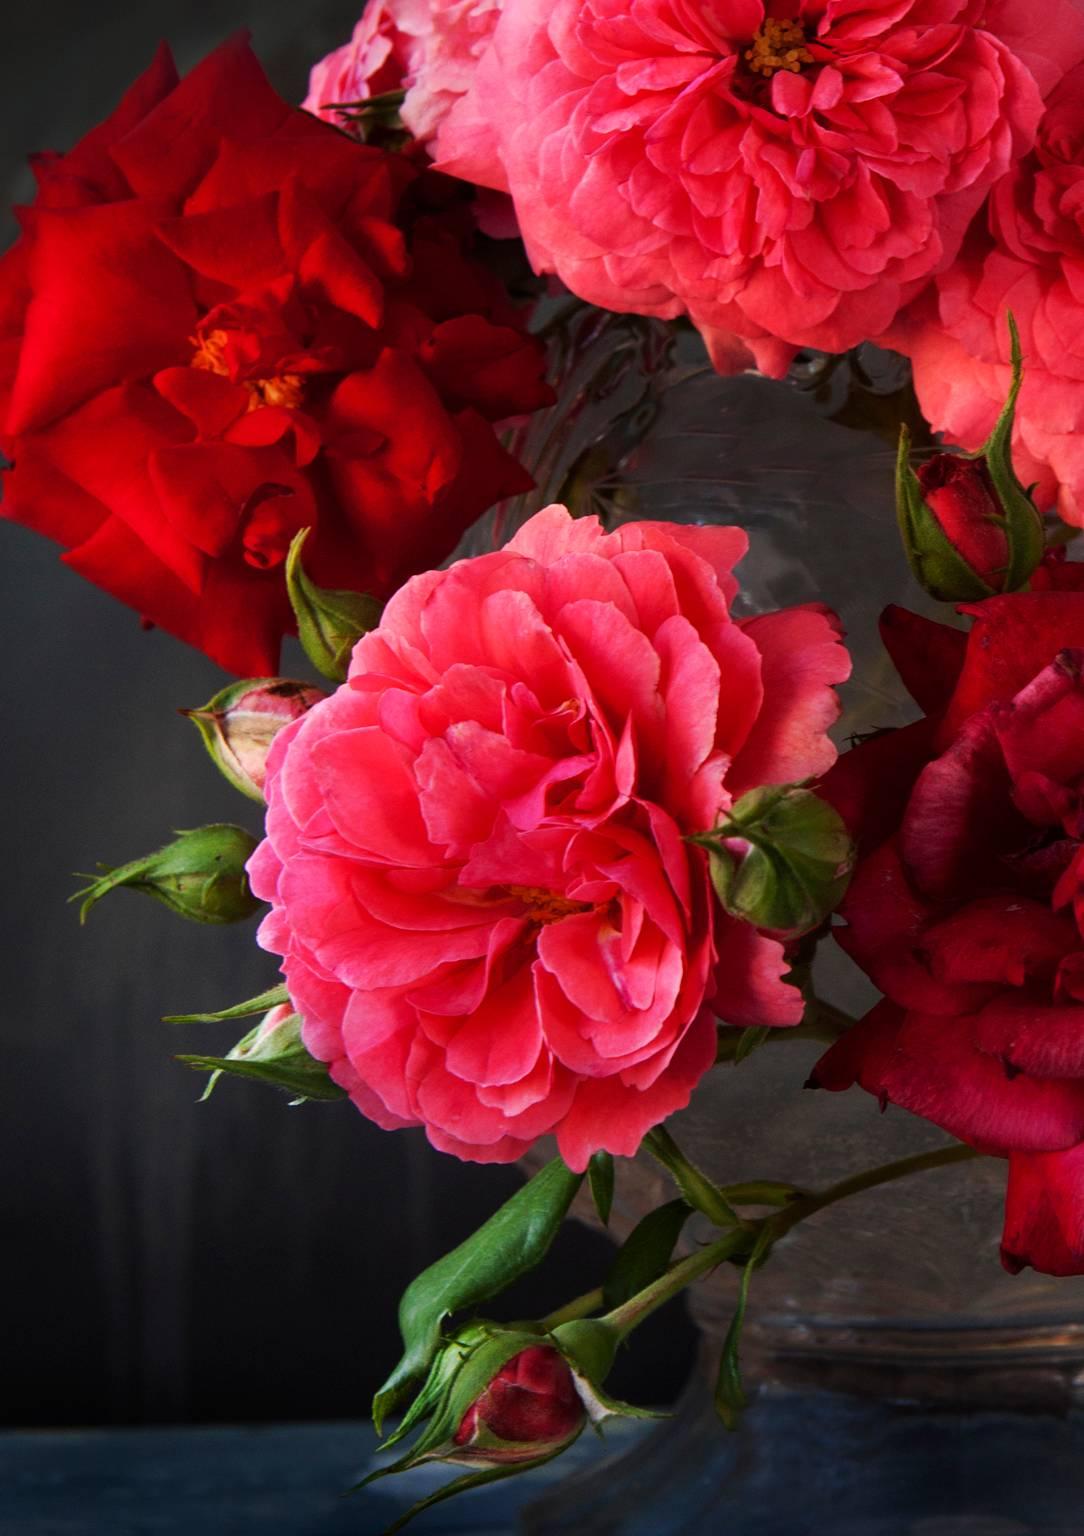 Roses II - Photograph by Ron Baxter Smith